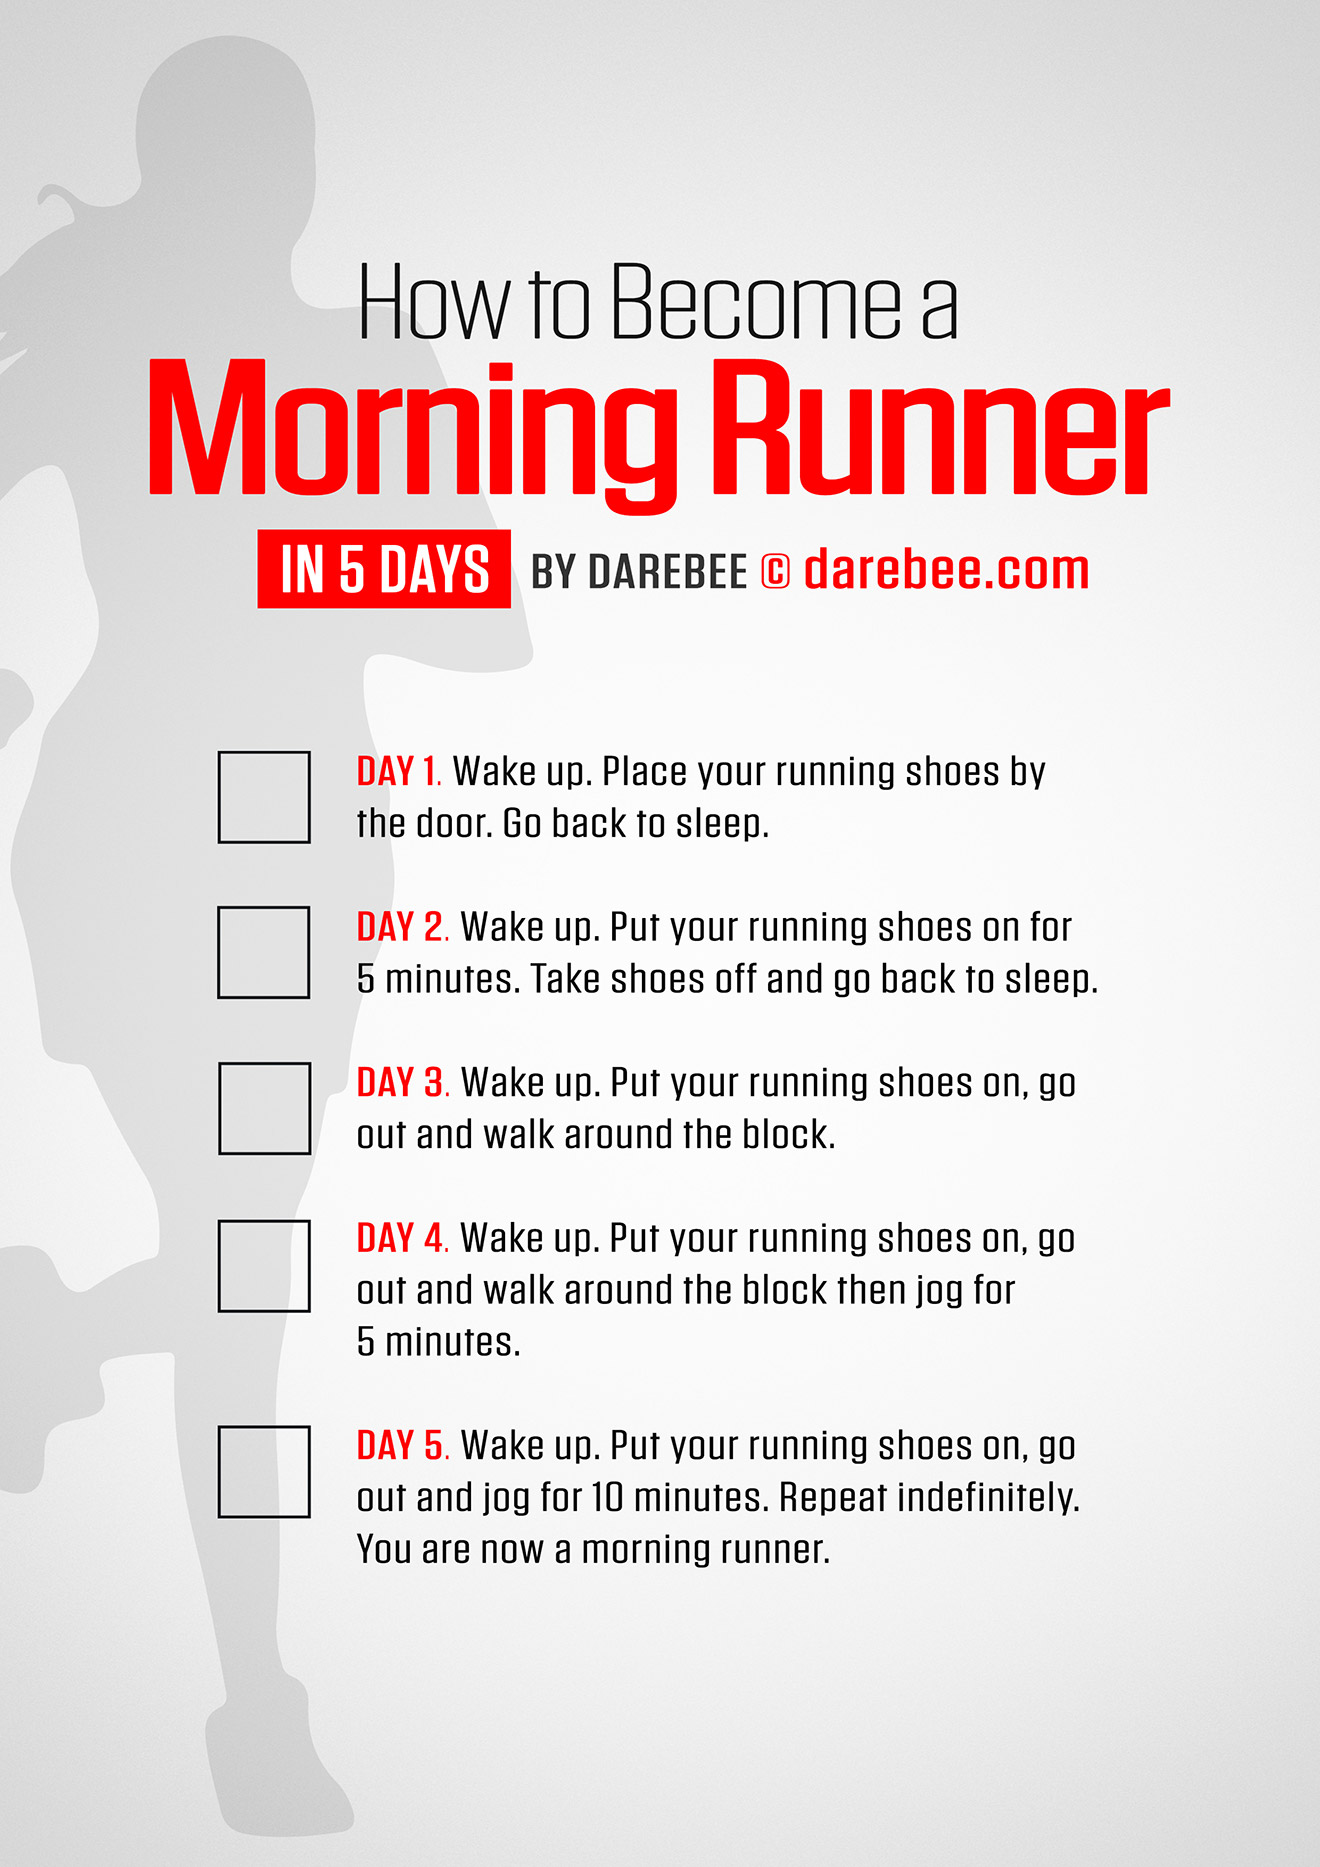 How to Become a Morning Runner